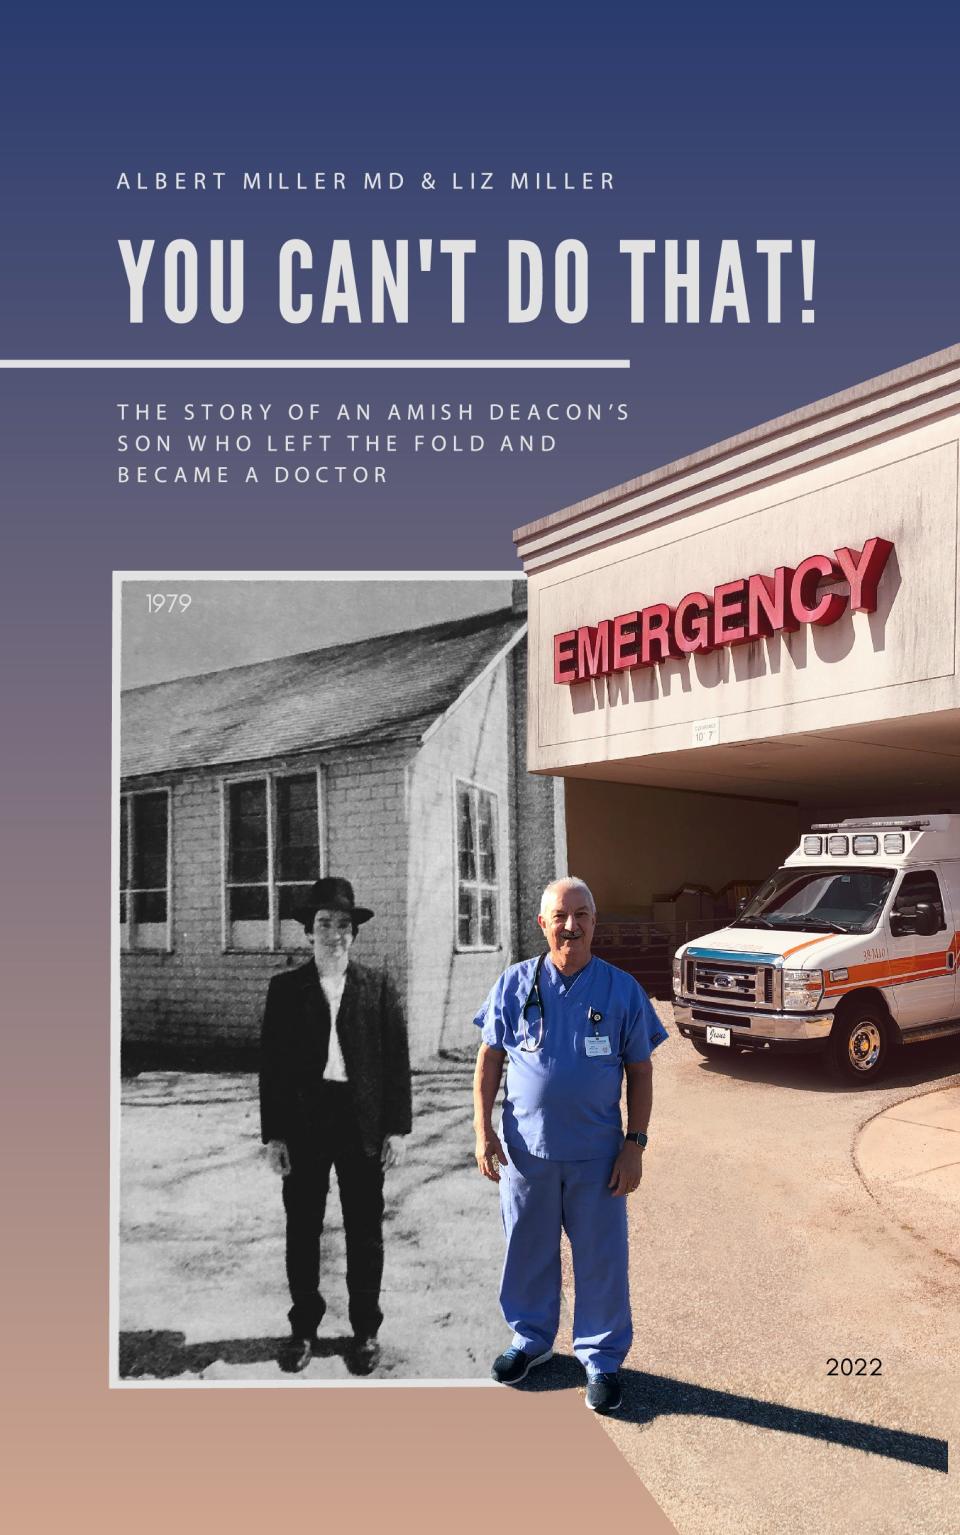 "You Can't Do That!" is available on Amazon and in area bookstores for $16.99. It's the story of Albert Miller, a Holmes County native who left his Amish roots to become a doctor. He wrote the book with his daughter, Liz Miller.